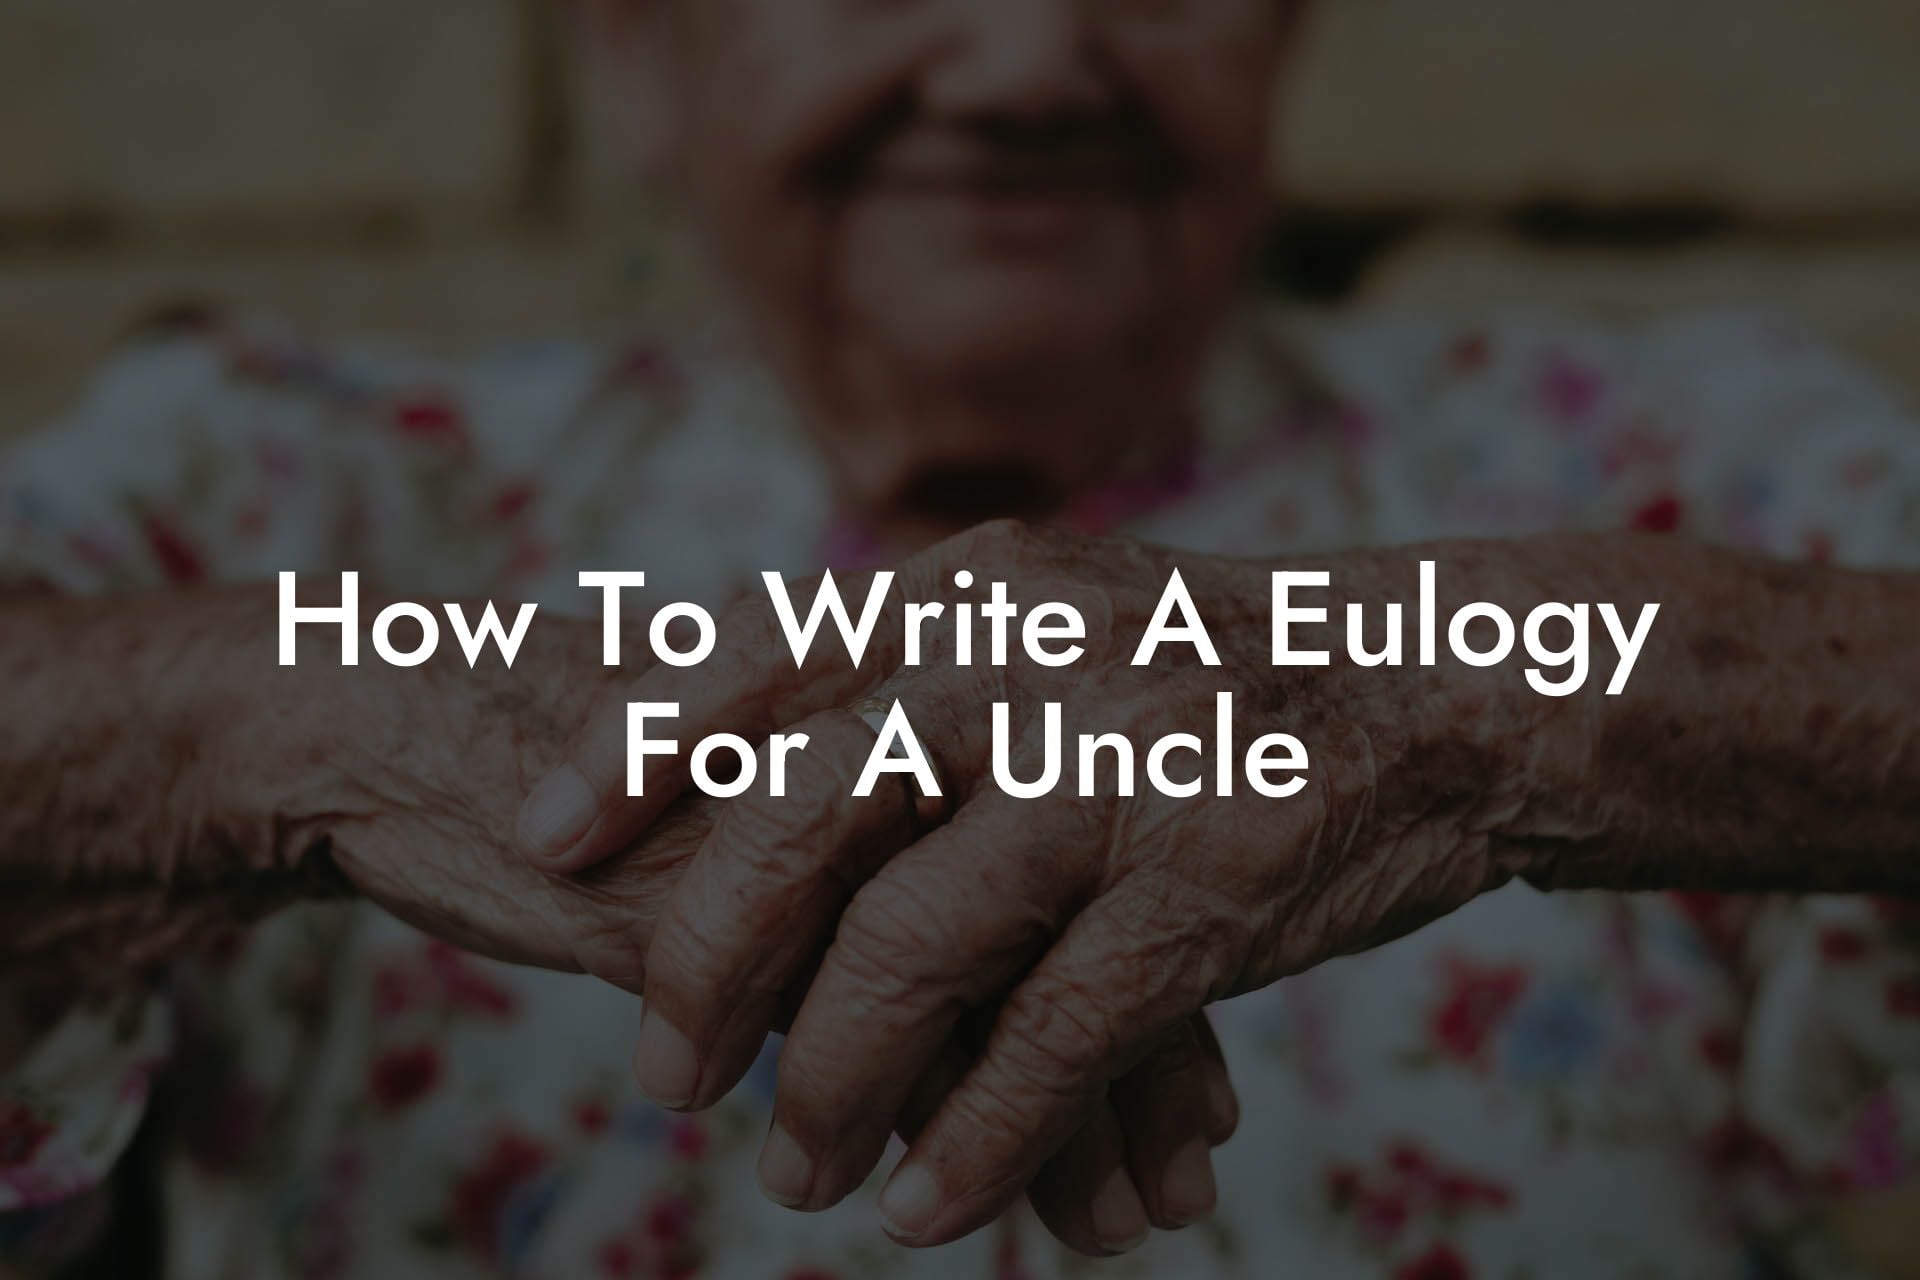 How To Write A Eulogy For A Uncle